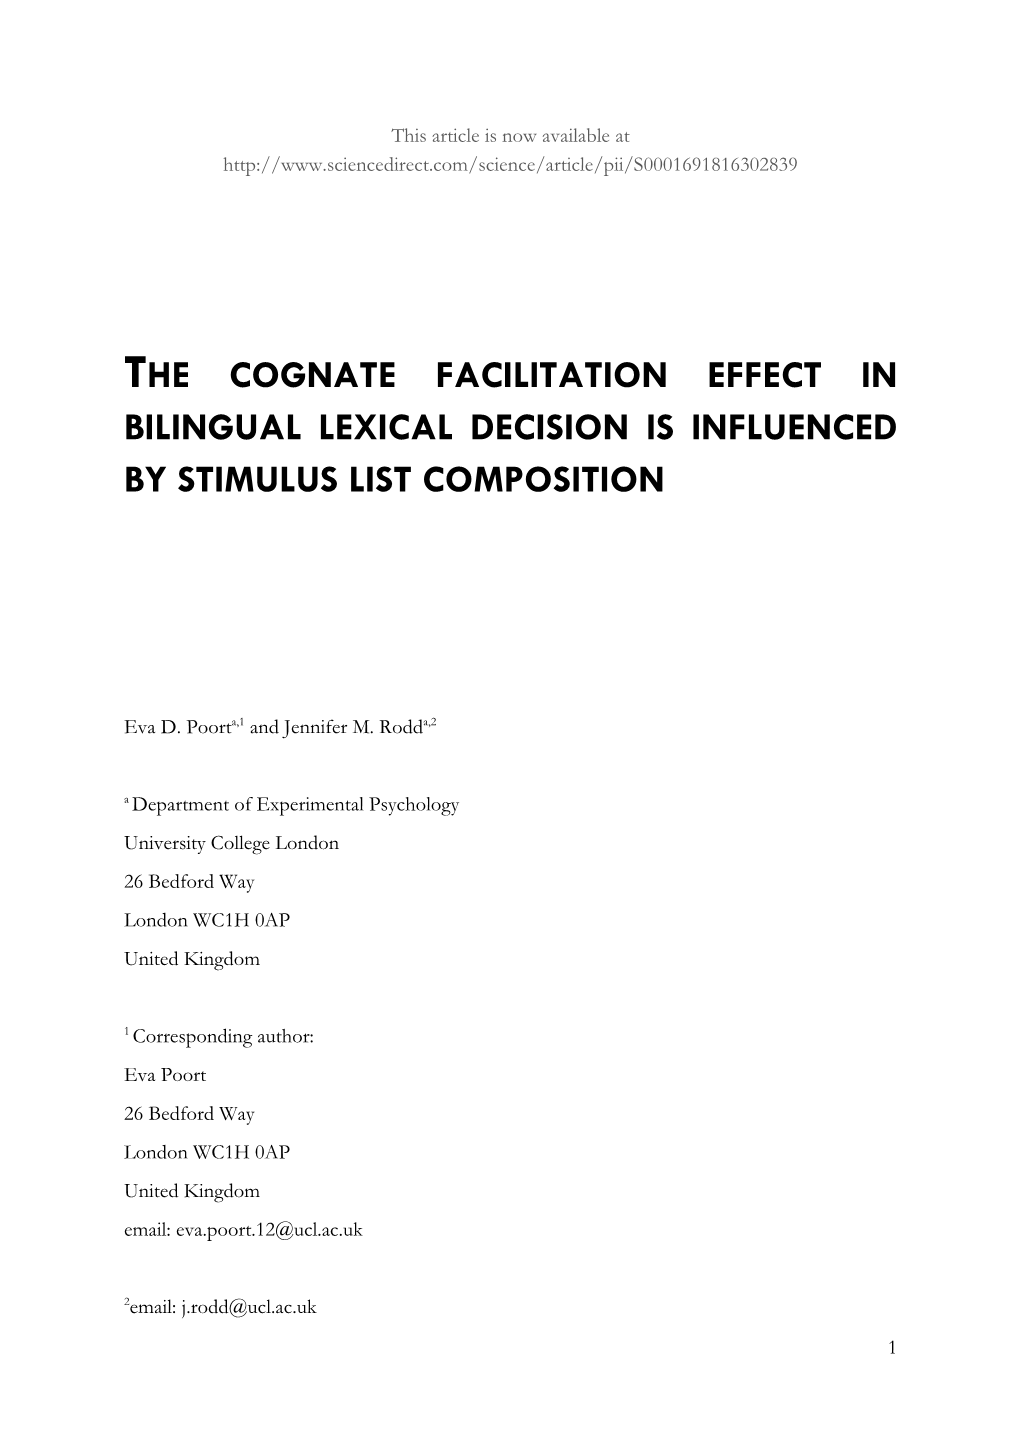 The Cognate Facilitation Effect in Bilingual Lexical Decision Is Influenced by Stimulus List Composition